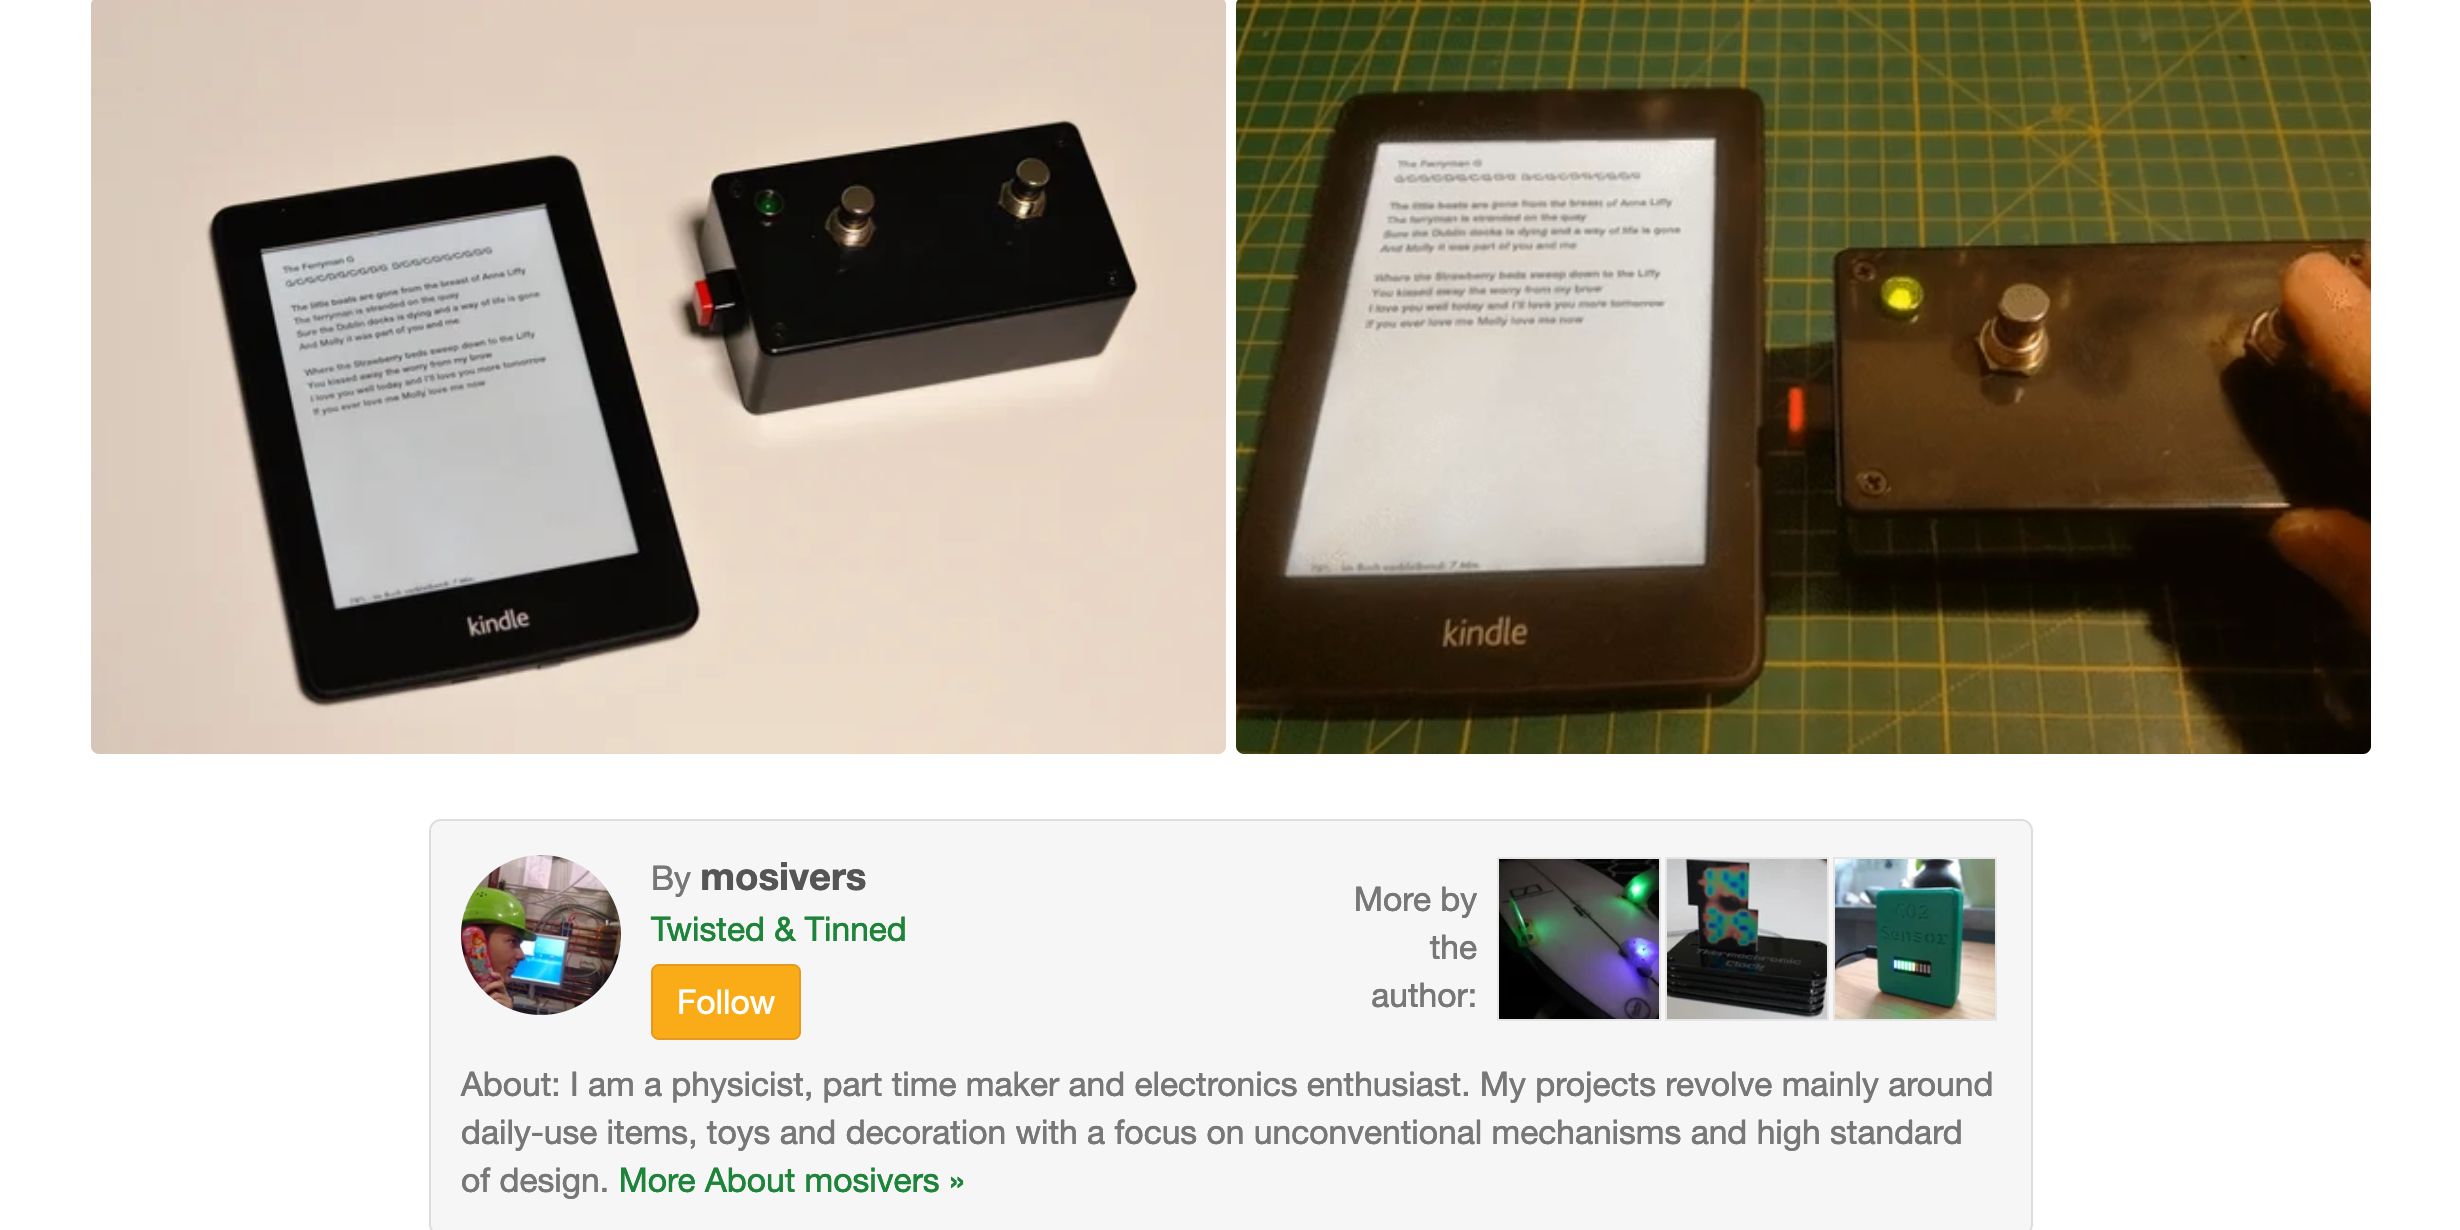 A screenshot showing a DIY footswitch next to a Kindle e-reader